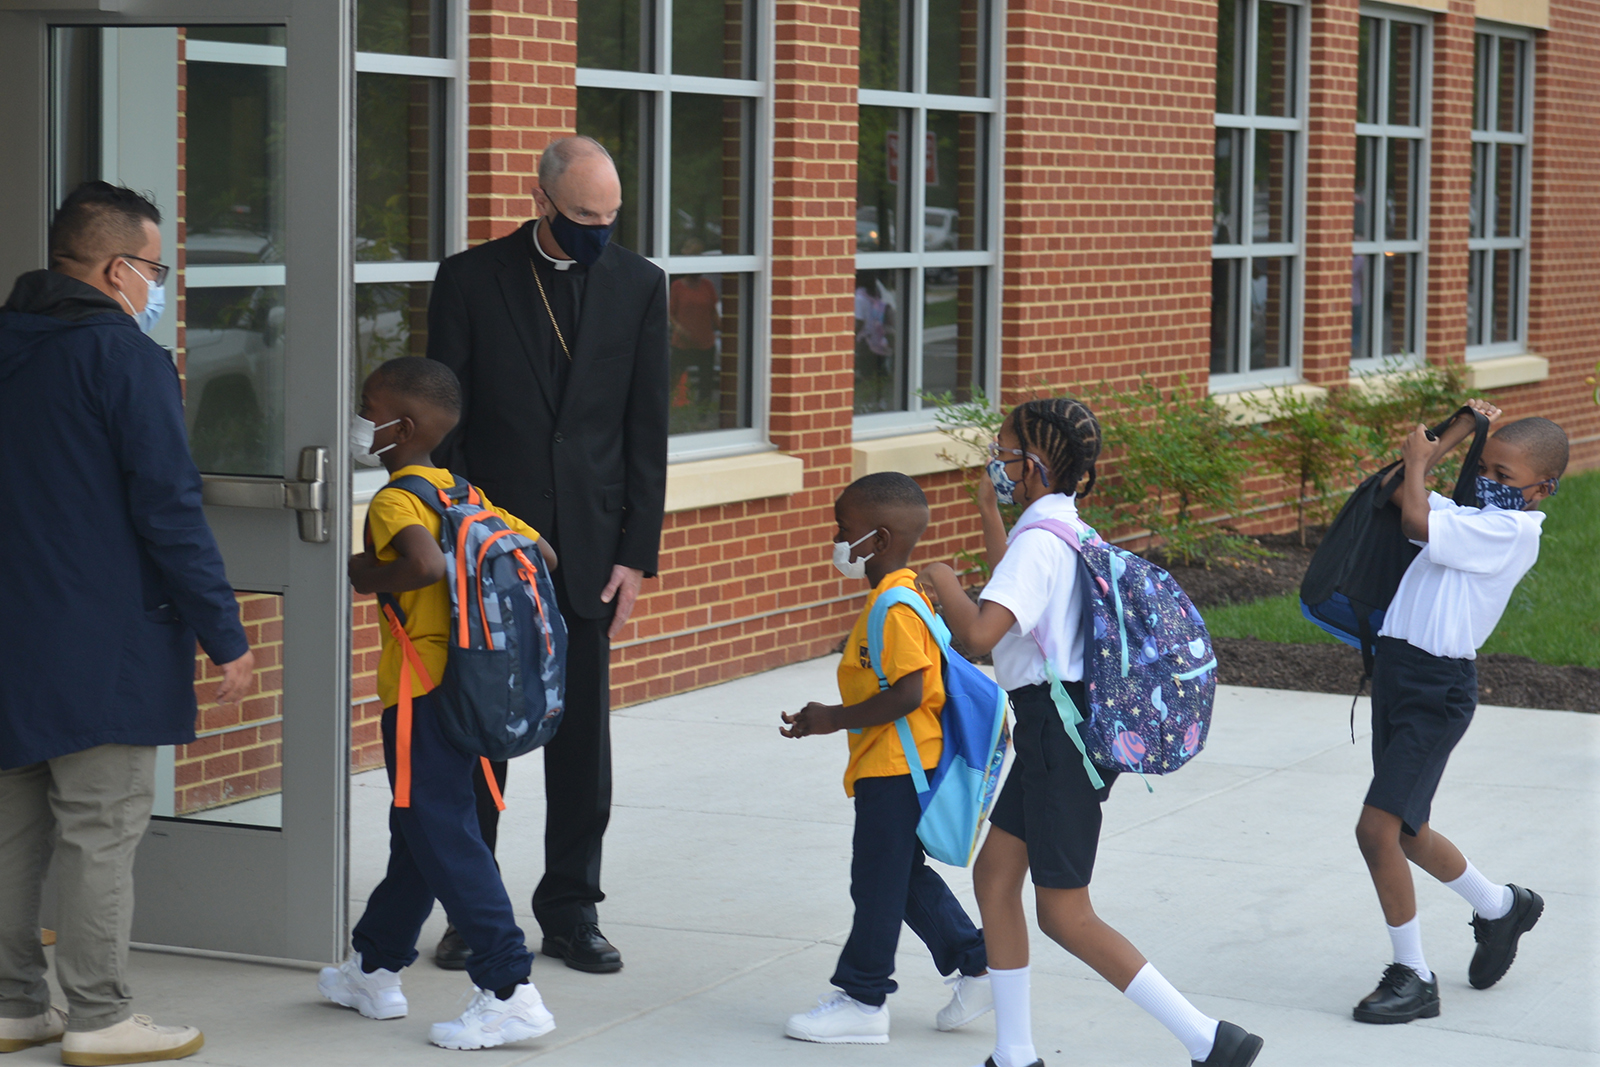 Youngsters enter the first new Catholic school built in Baltimore in roughly 60 years with a mix of enthusiasm and first-day jitters, Aug. 30, 2021. The 65,000-square-foot school near downtown Baltimore is an anomaly in the national education landscape, where the pandemic has shuttered many parish schools. It's named after Mother Mary Lange, who started a Catholic school for Black children in 1828. (AP Photo/David McFadden)